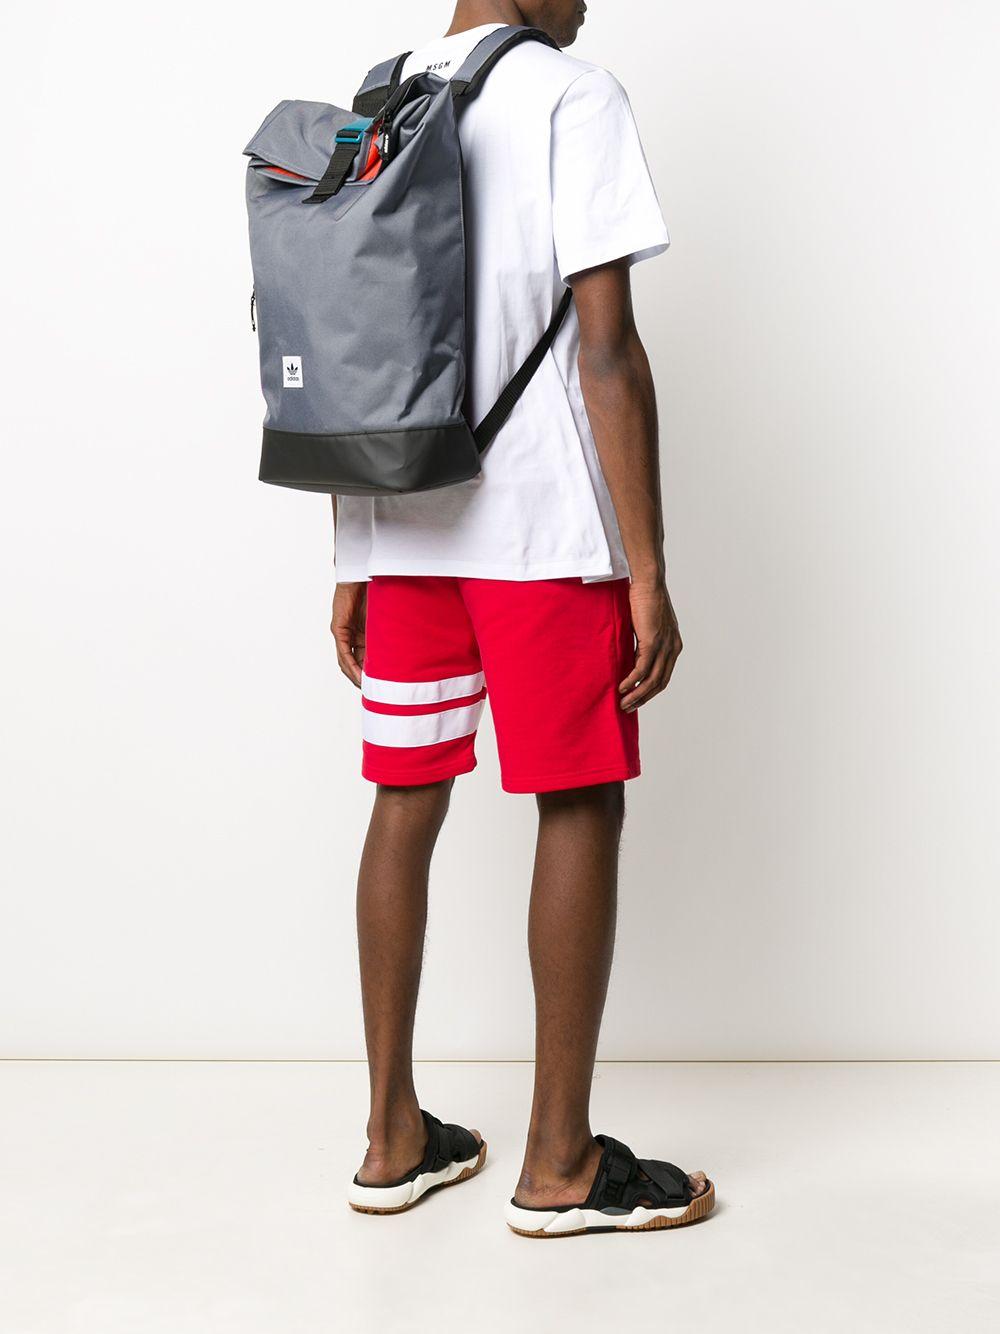 adidas Pe Rolltop Backpack in Gray | Lyst